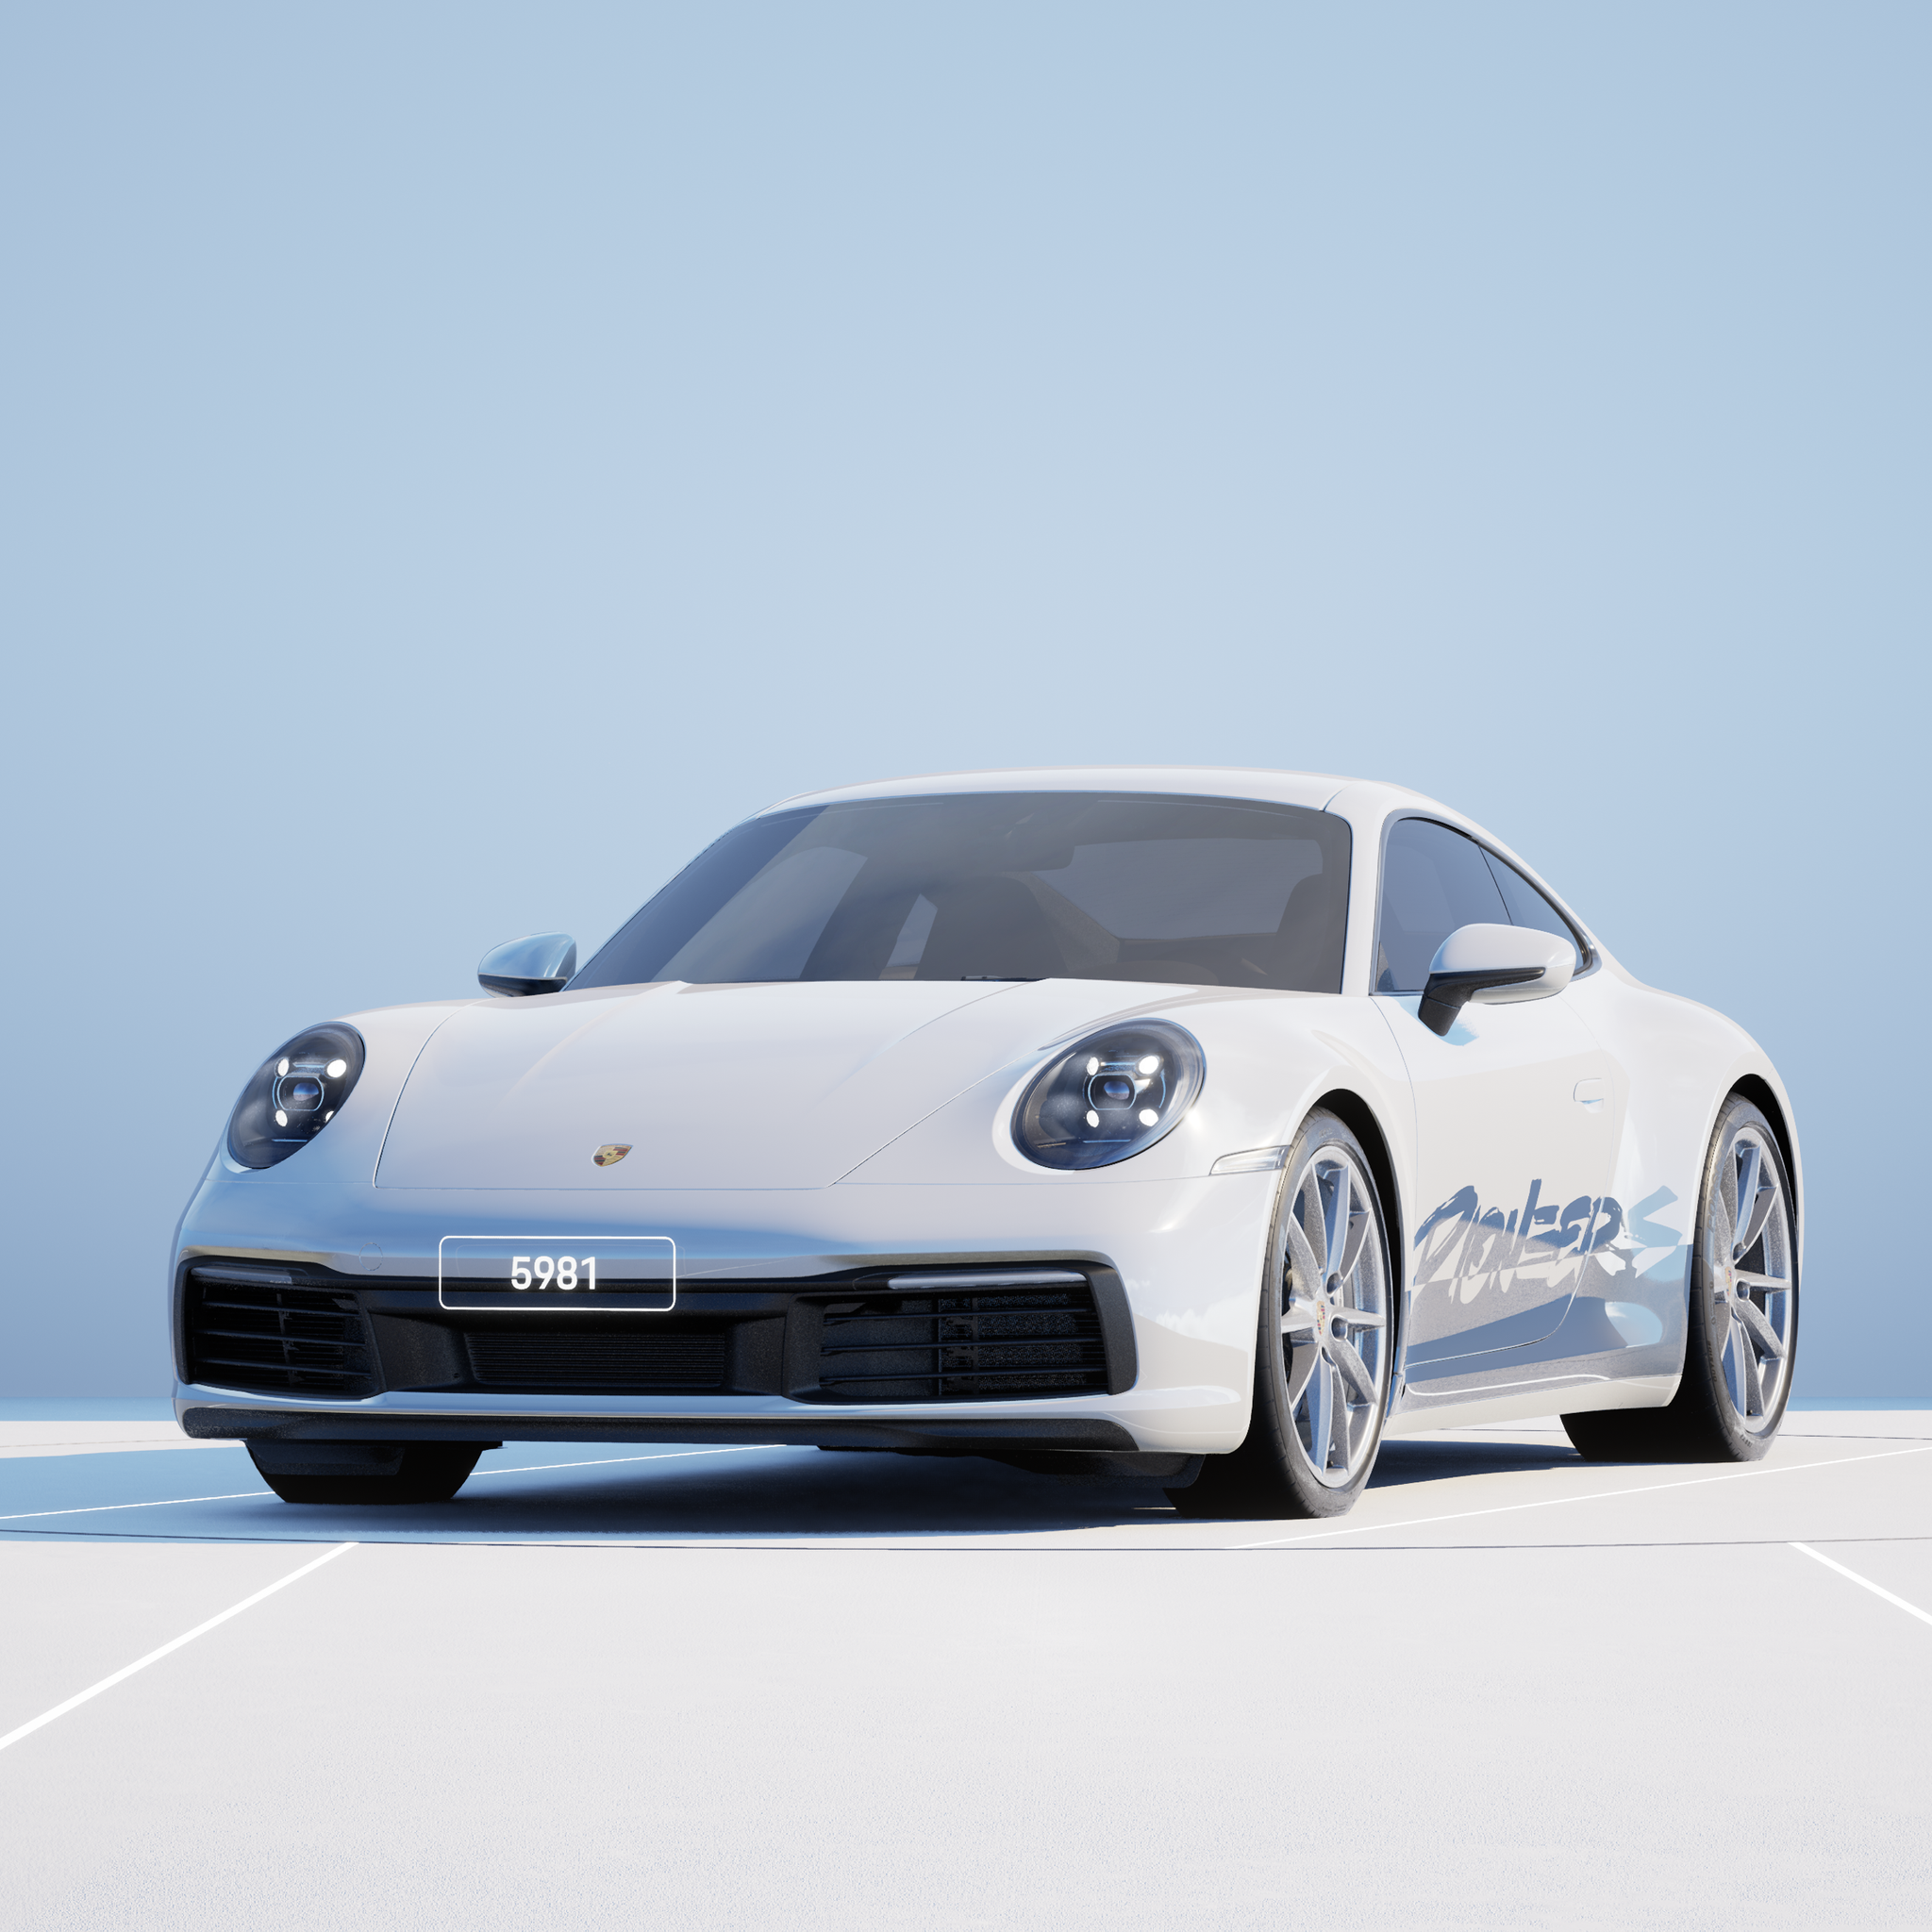 The PORSCHΞ 911 5981 image in phase